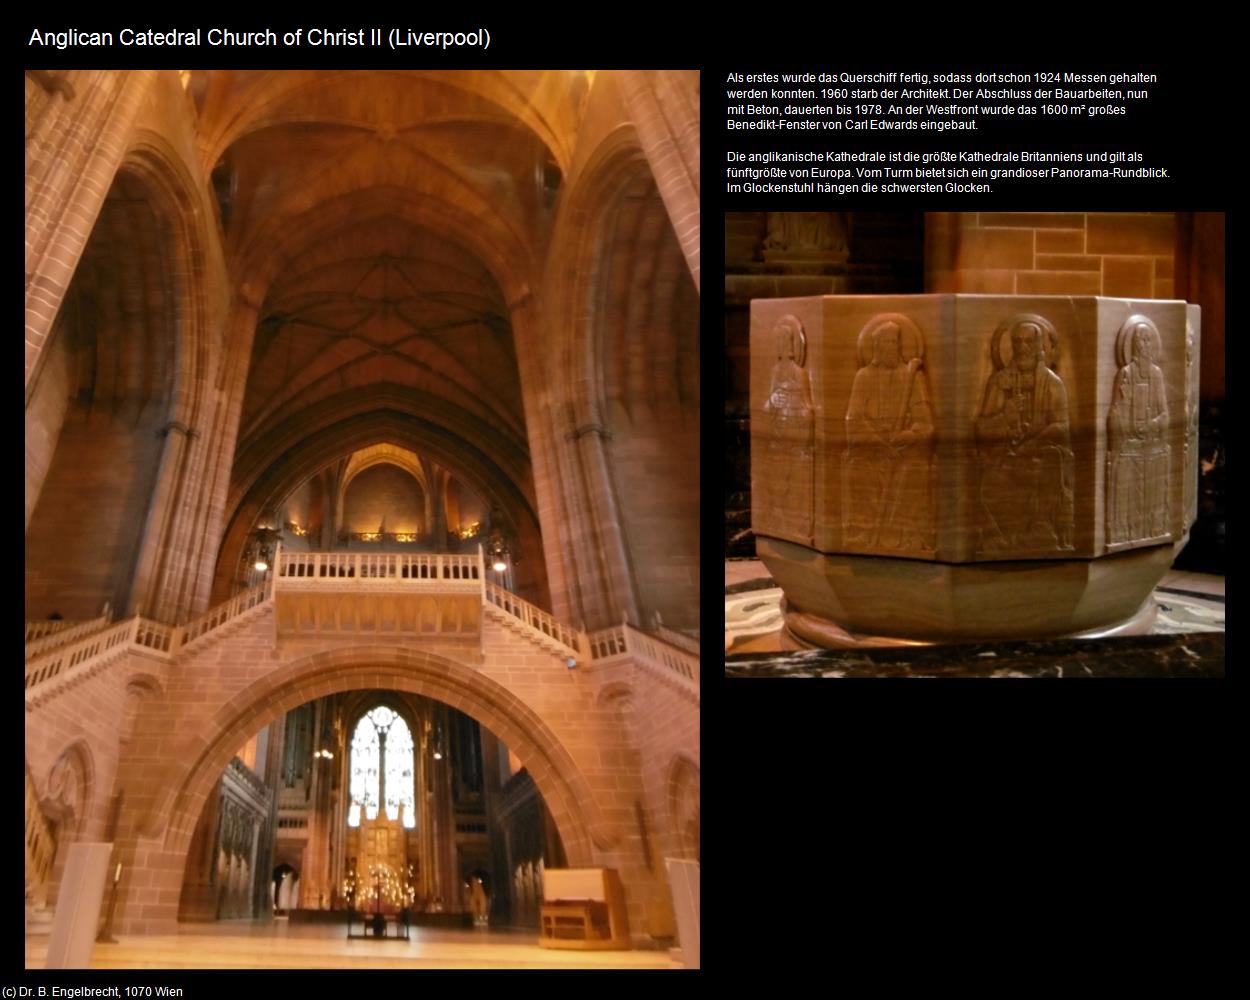 Anglican Catedral Church of Christ II   (Liverpool, England) in Kulturatlas-ENGLAND und WALES